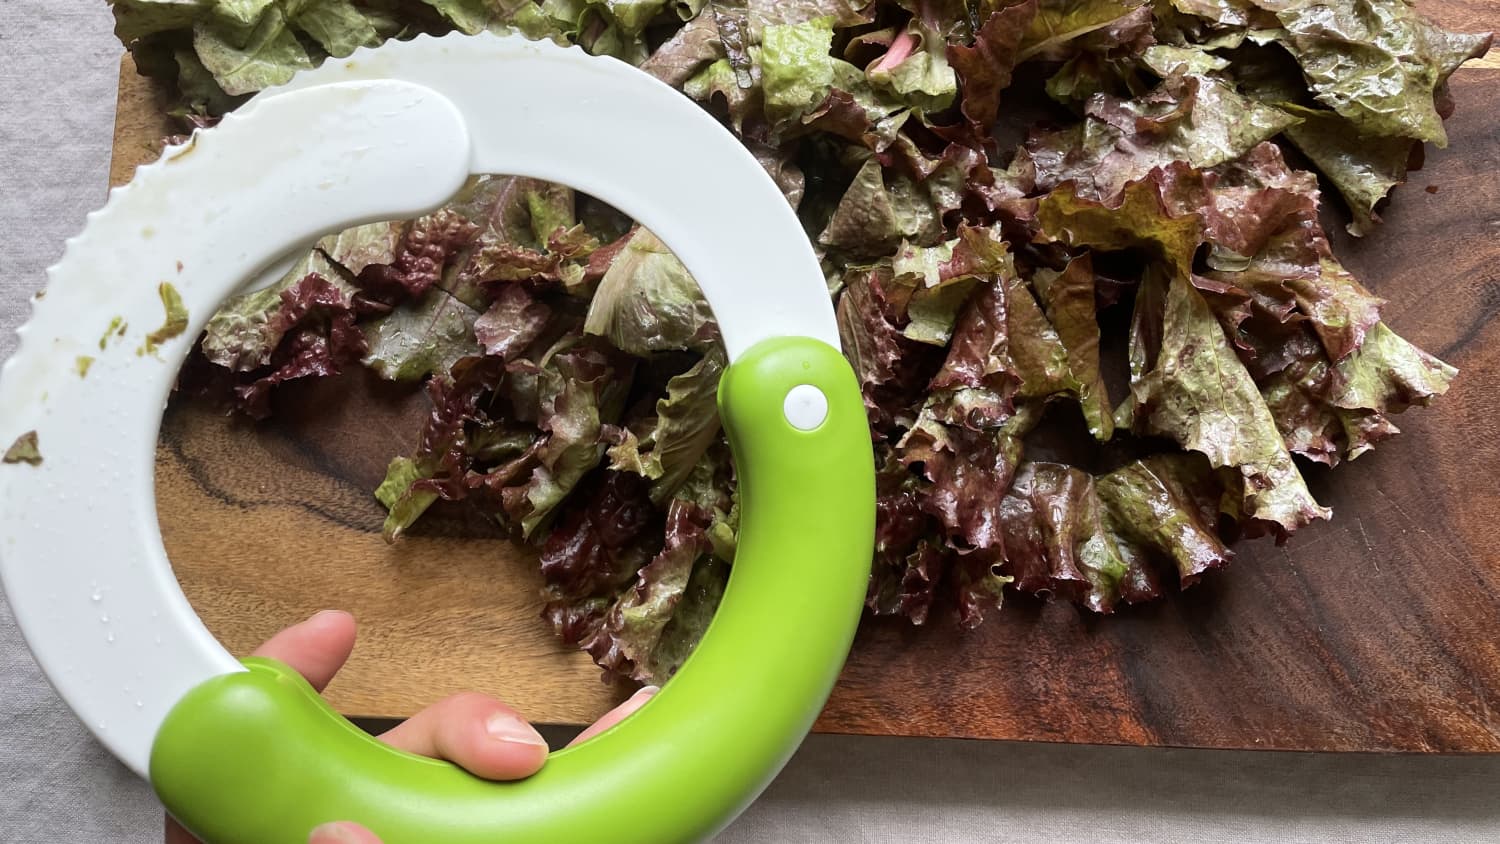 Shoppers Swear by This $10 Chopper for Crunchy Salads